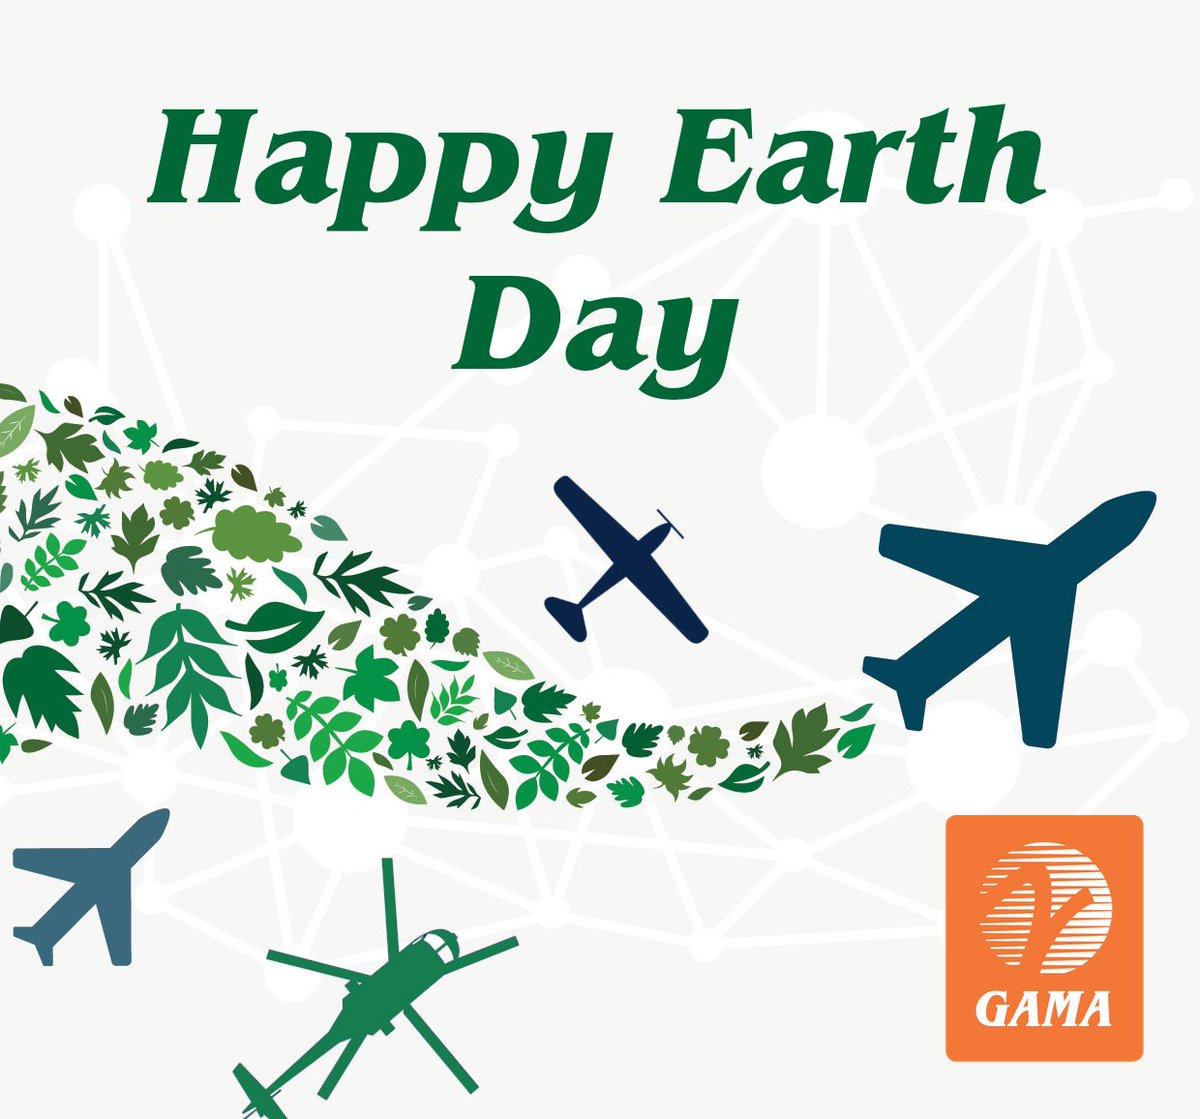 Happy Earth Day!

The general and business aviation industry is committed to environmental sustainability and prioritizing innovations and practices that will help to achieve our goal of being carbon–neutral by 2050.

#EarthDay #SustainableAviation